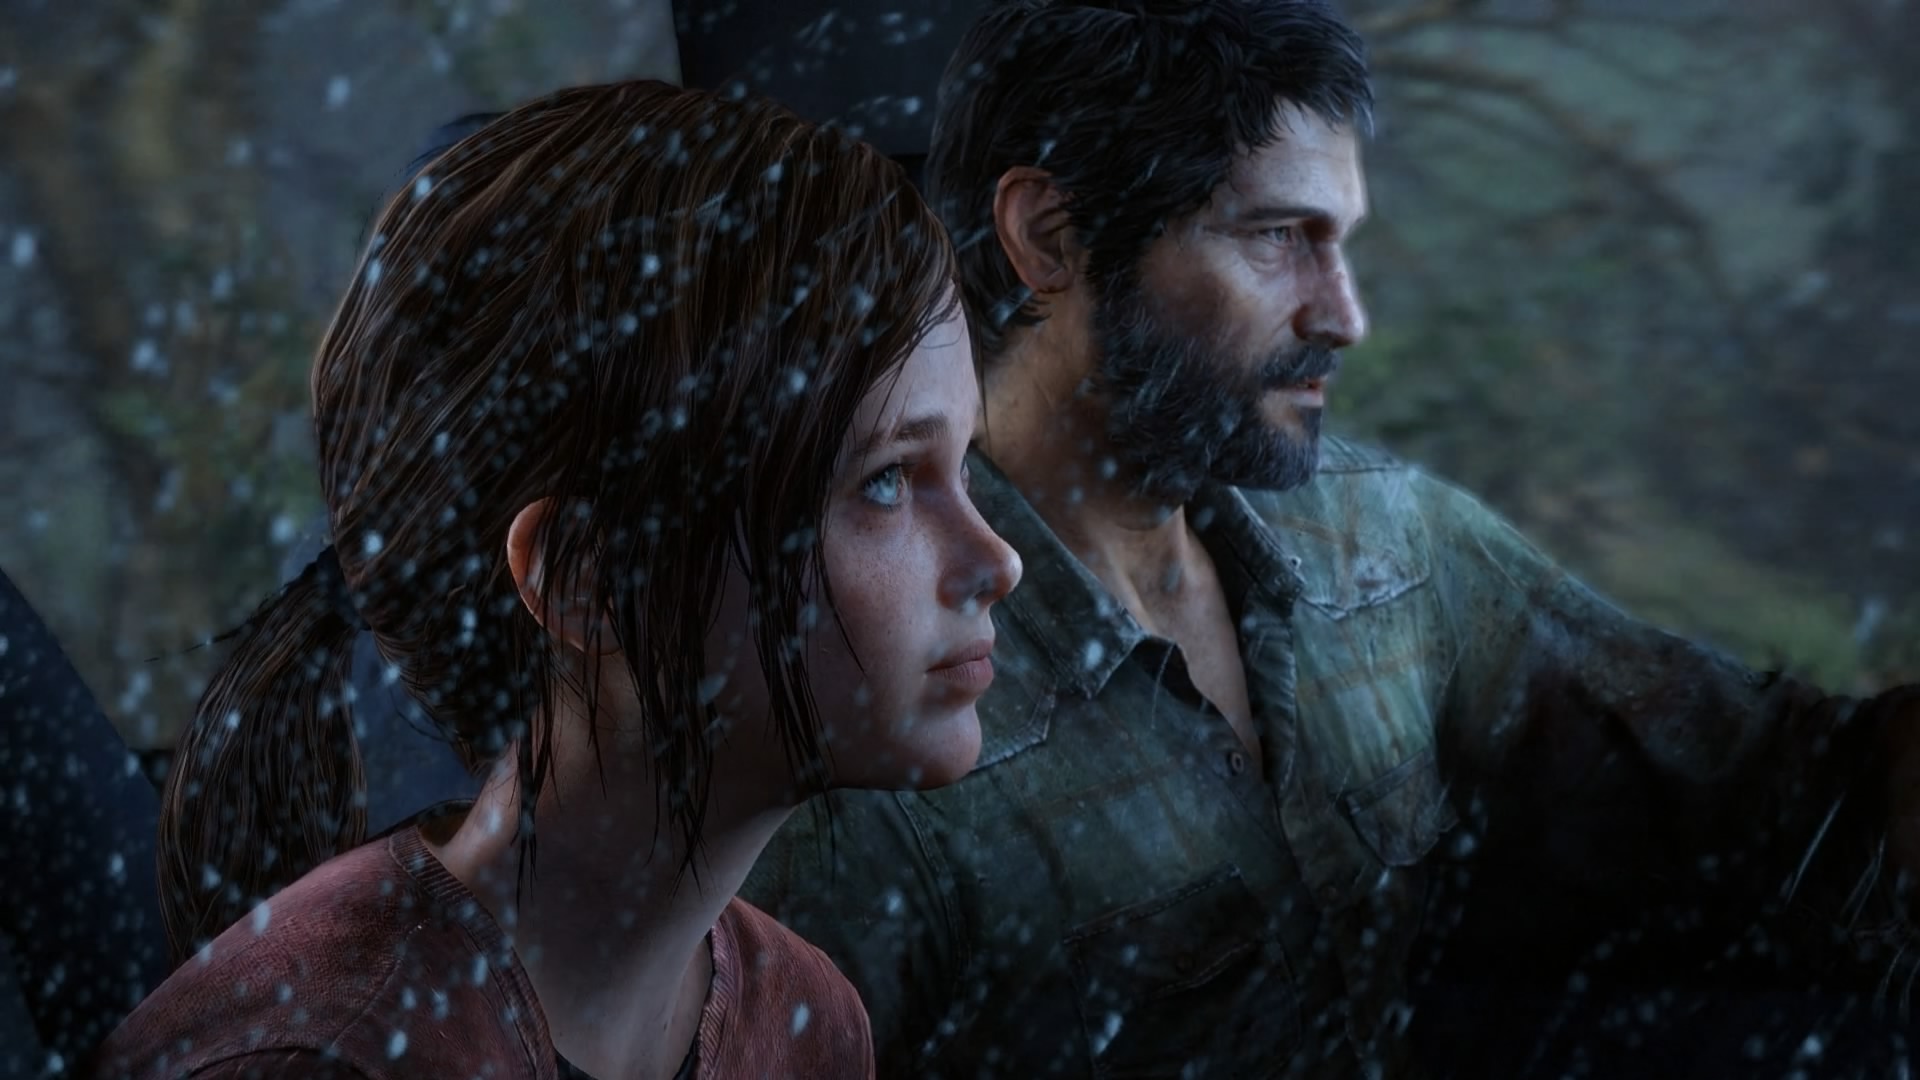 The Last Of Us 2017, Hd Games, 4k Wallpapers, Images, - Ellie The Last Of Us 2 - HD Wallpaper 